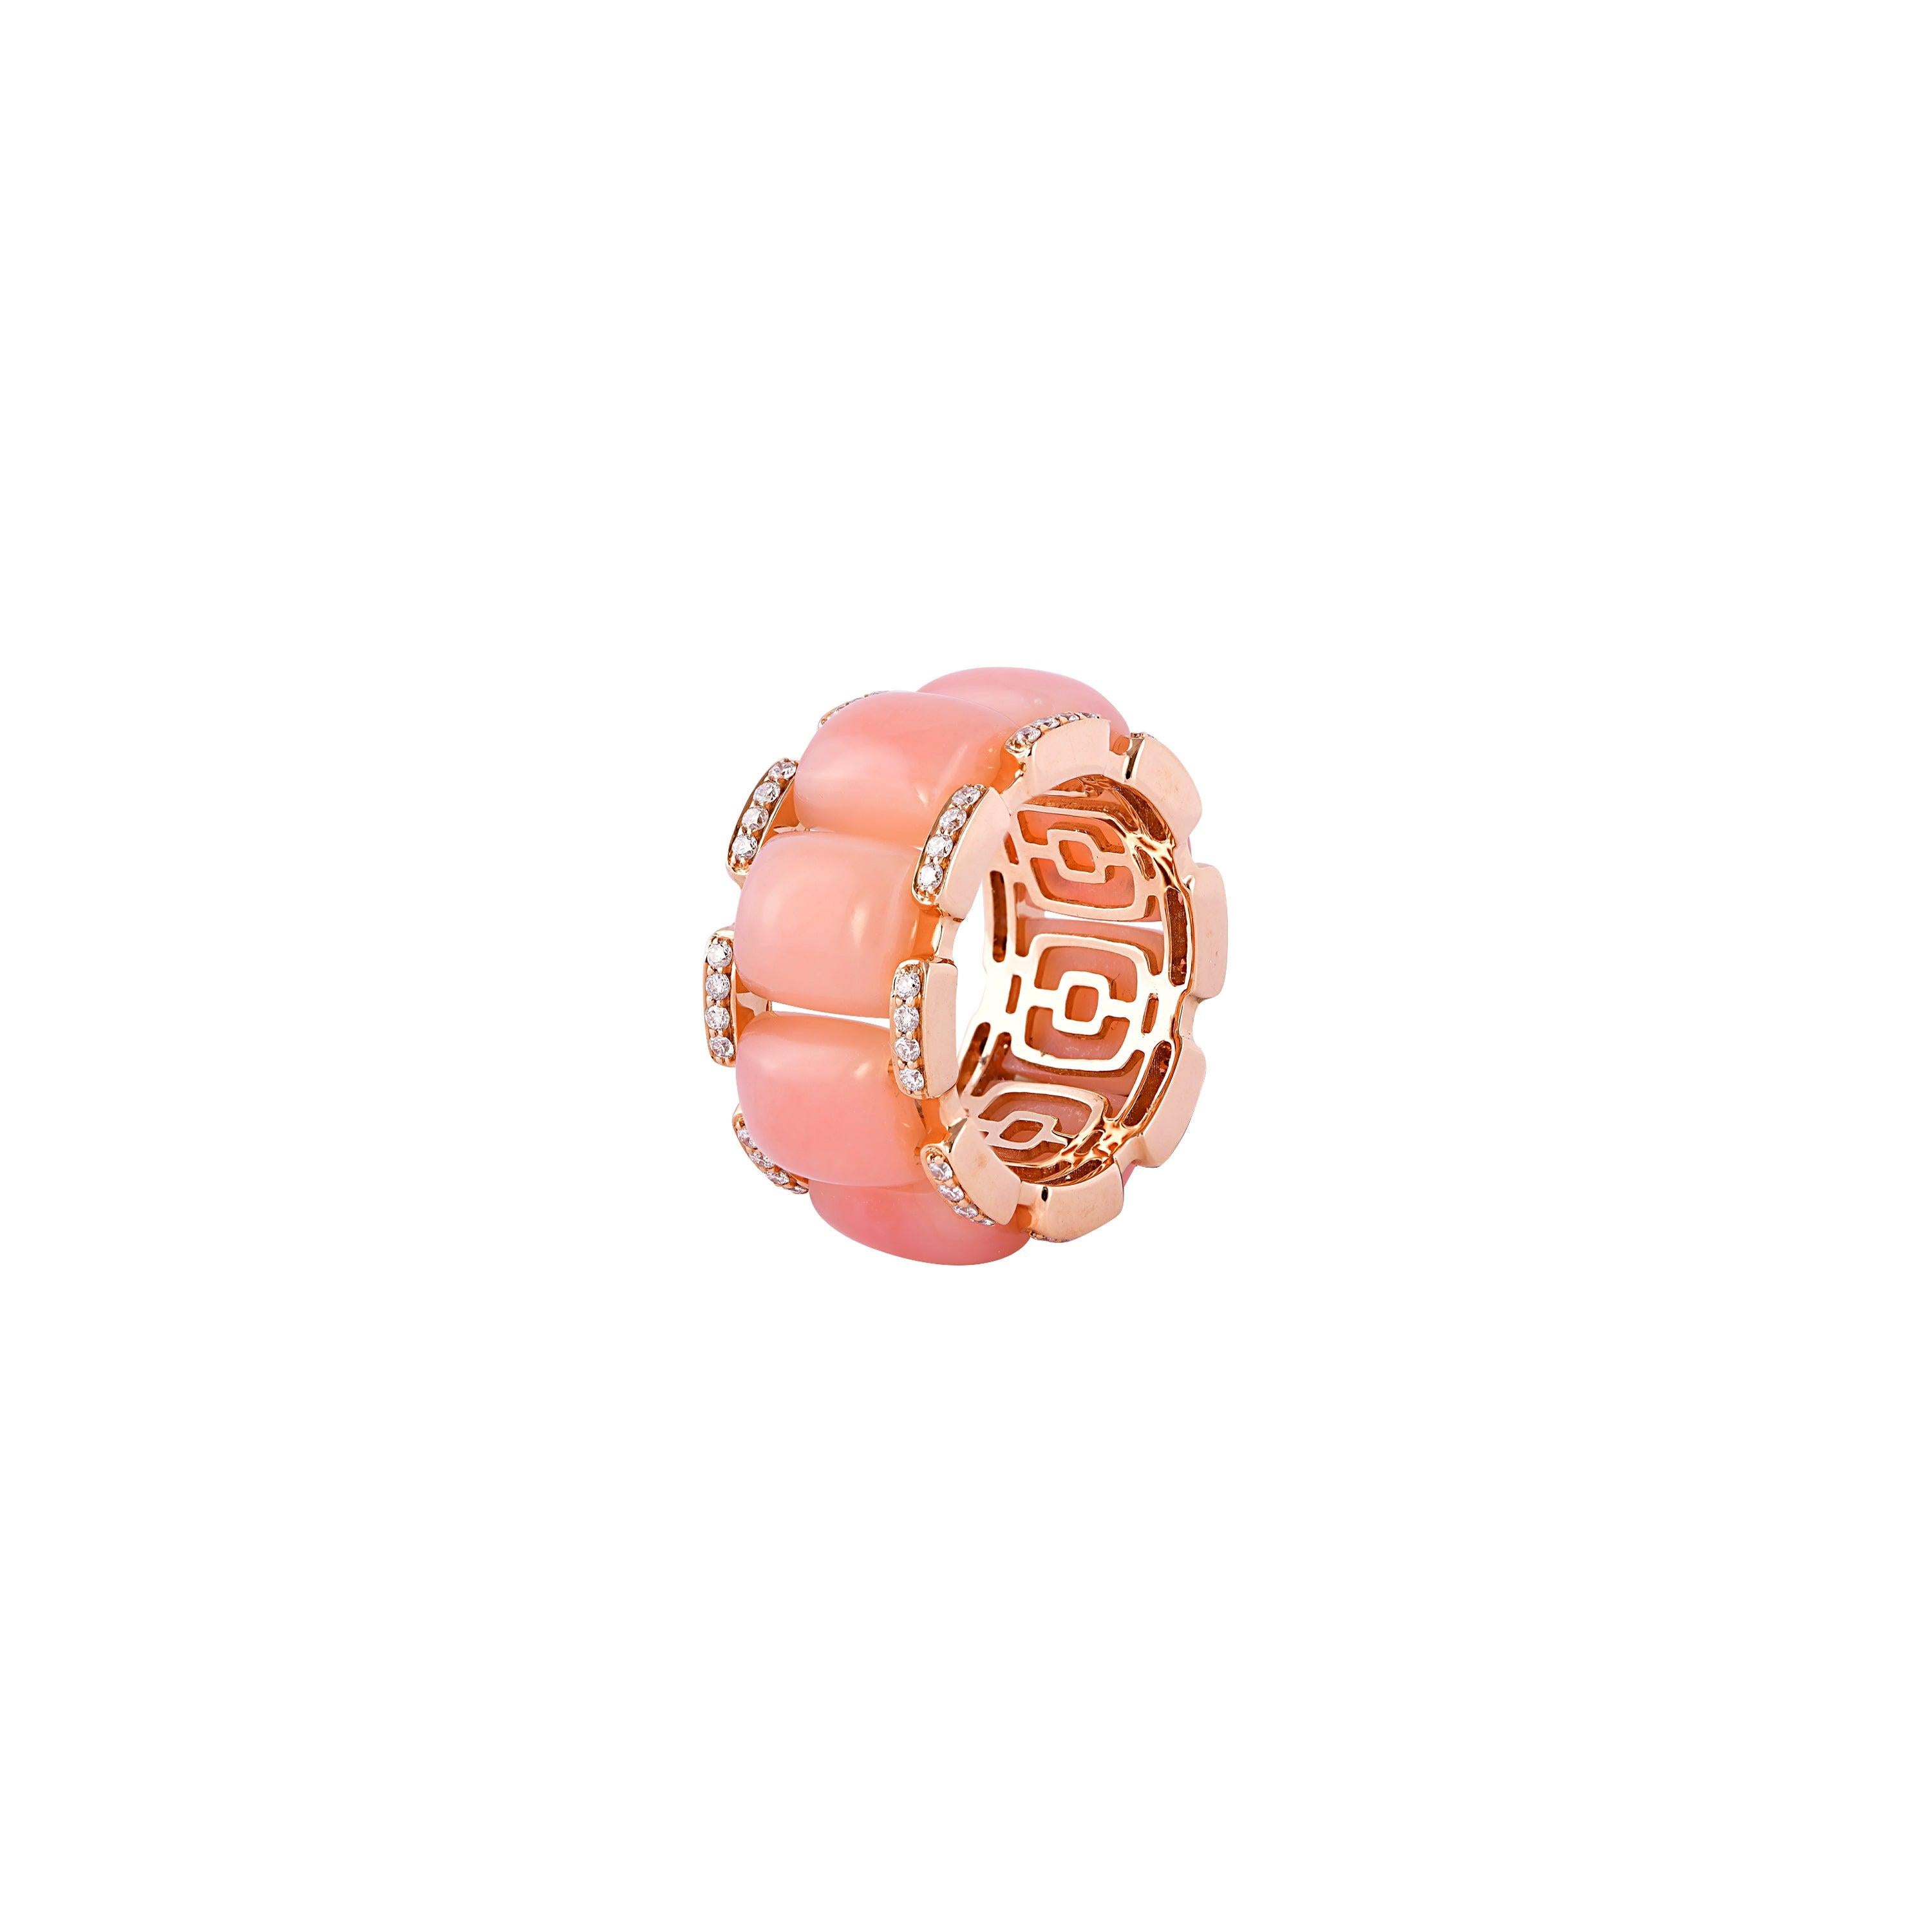 For Sale:  12.3 Carat Pink Opal and White Diamond Ring in 18 Karat Rose Gold 3